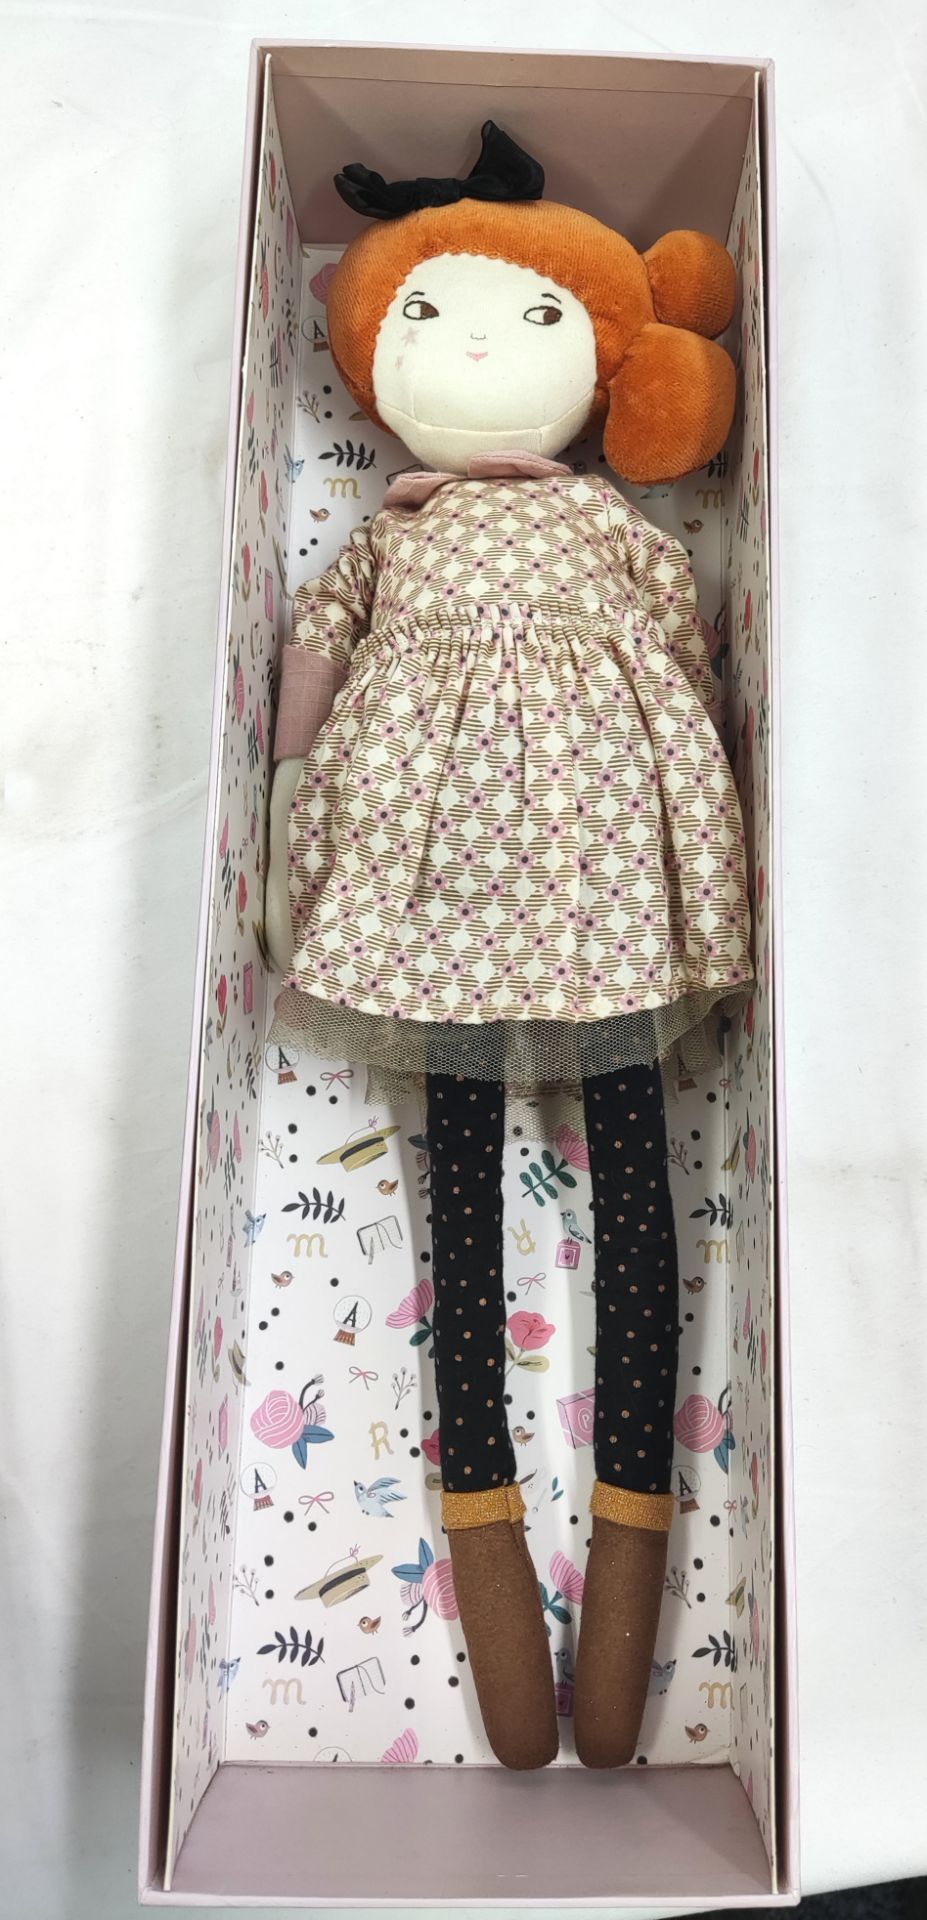 1 x MOULIN ROTY Madame Constance 47cm Les Parisiennes Doll - New/Boxed - Original RRP £60.00 - Image 2 of 10